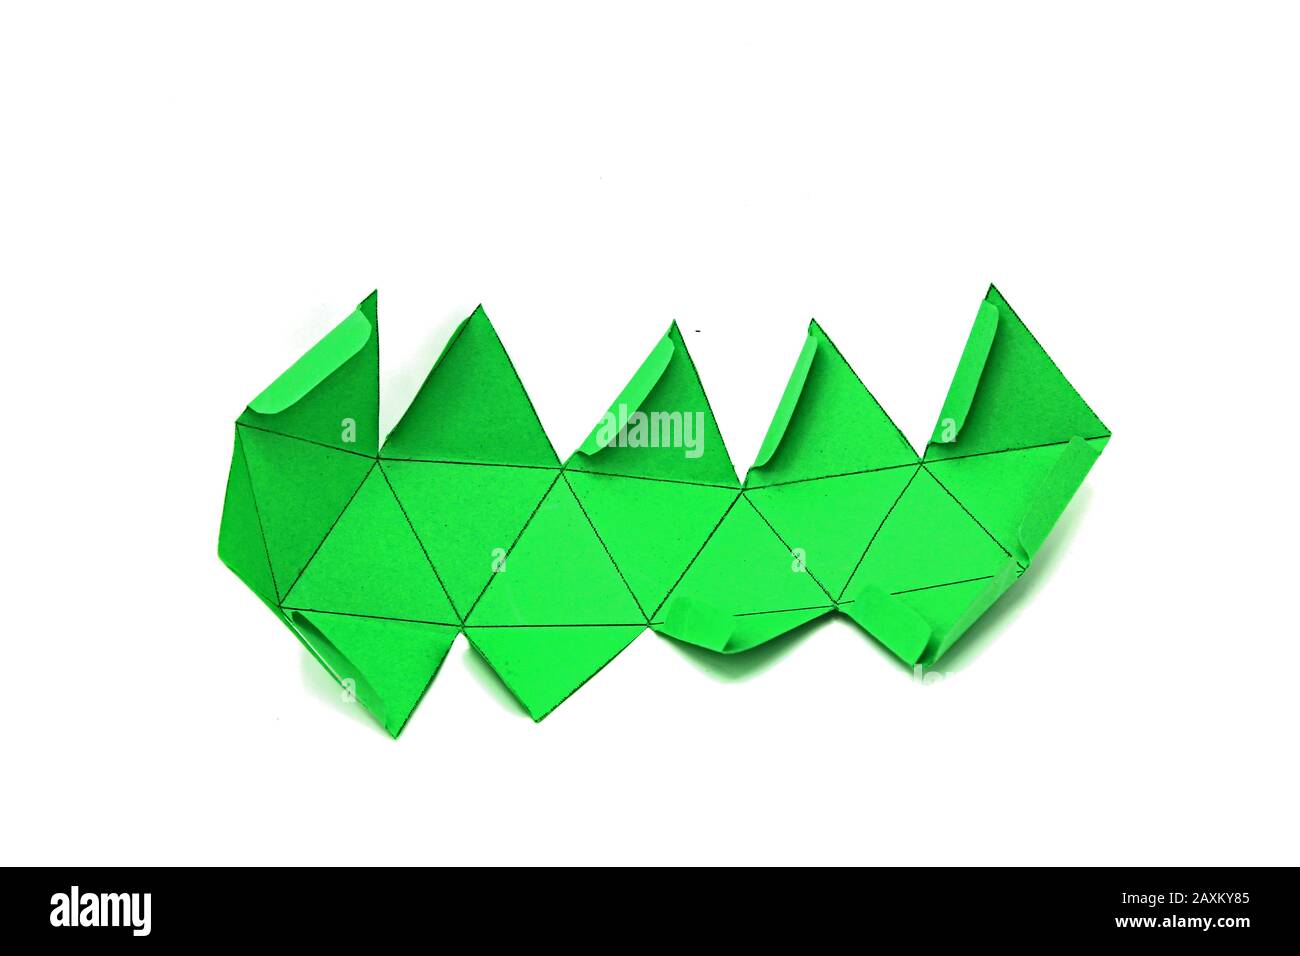 Geometric shape cut out of green paper and photographed on white background. Geometry net of platonic solids Icosahedron. 2-dimensional shape that can Stock Photo